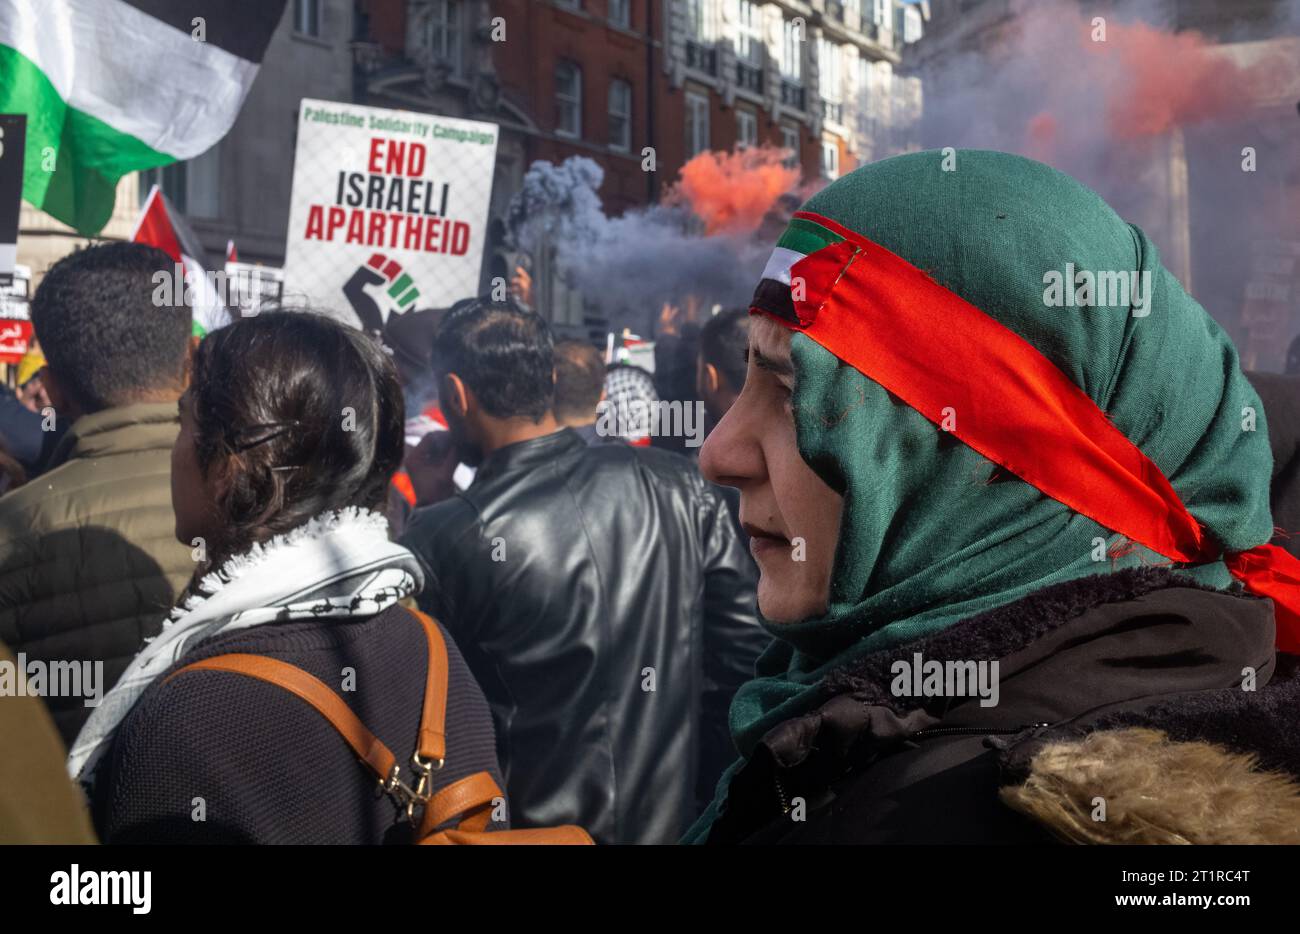 London, UK. 14 Oct 2023: Pro-Palestinian protesters march with placards and flares in central London, UK at a demonstration against Israeli attacks on Stock Photo